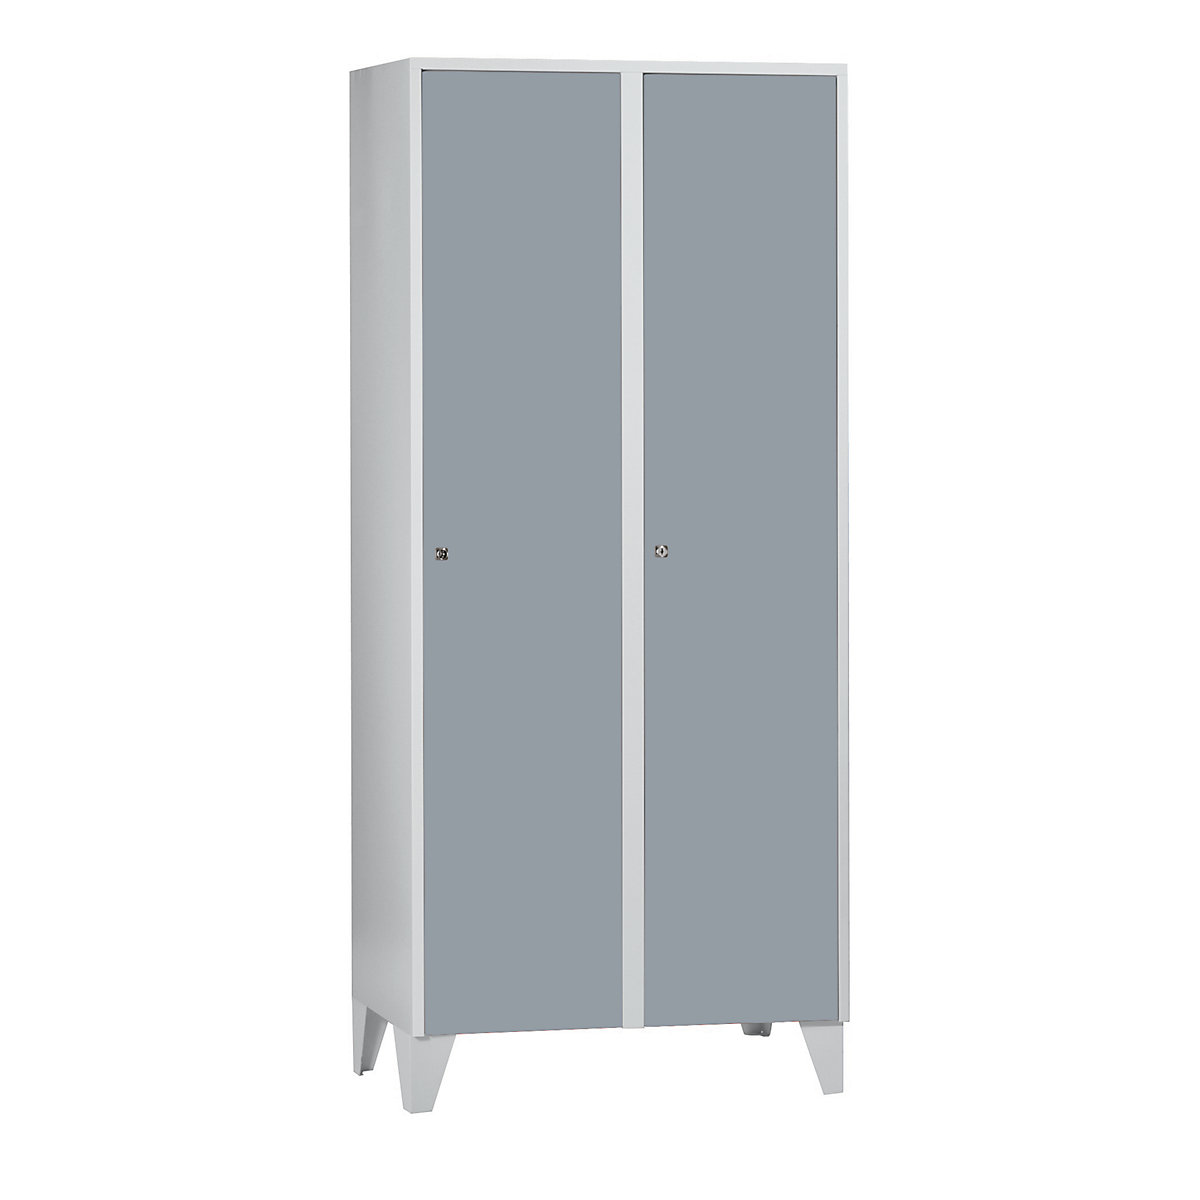 Cloakroom locker with feet – Wolf, HxWxD 1850 x 800 x 500 mm, 2 compartments, silver grey-7